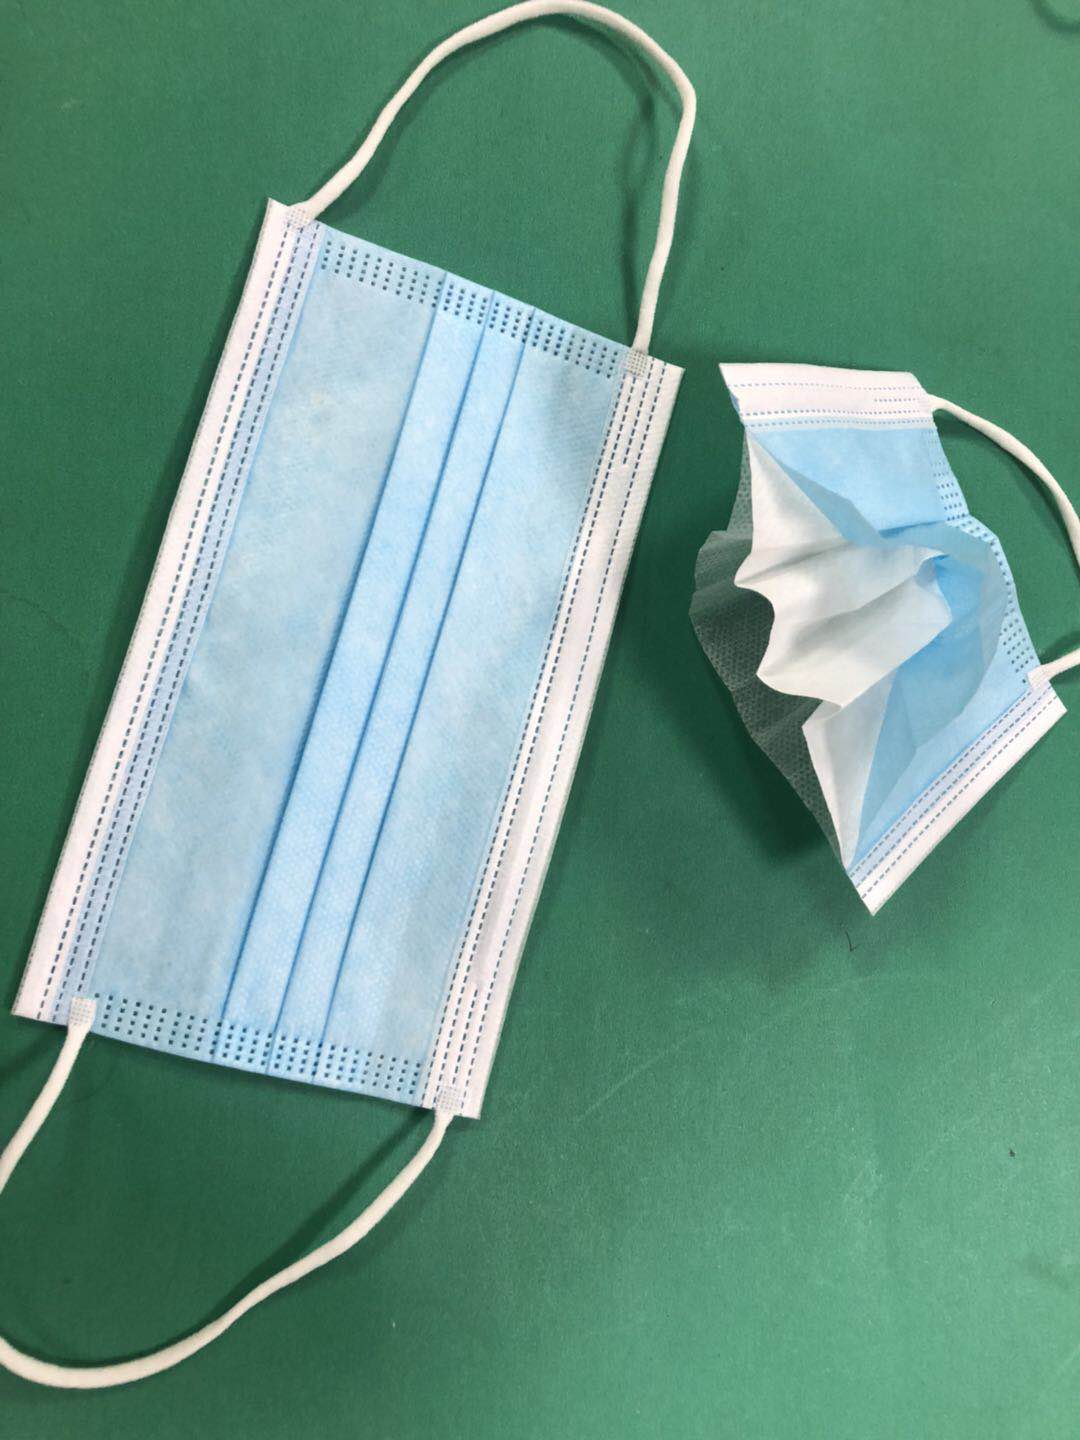 disposable sterile medical devices